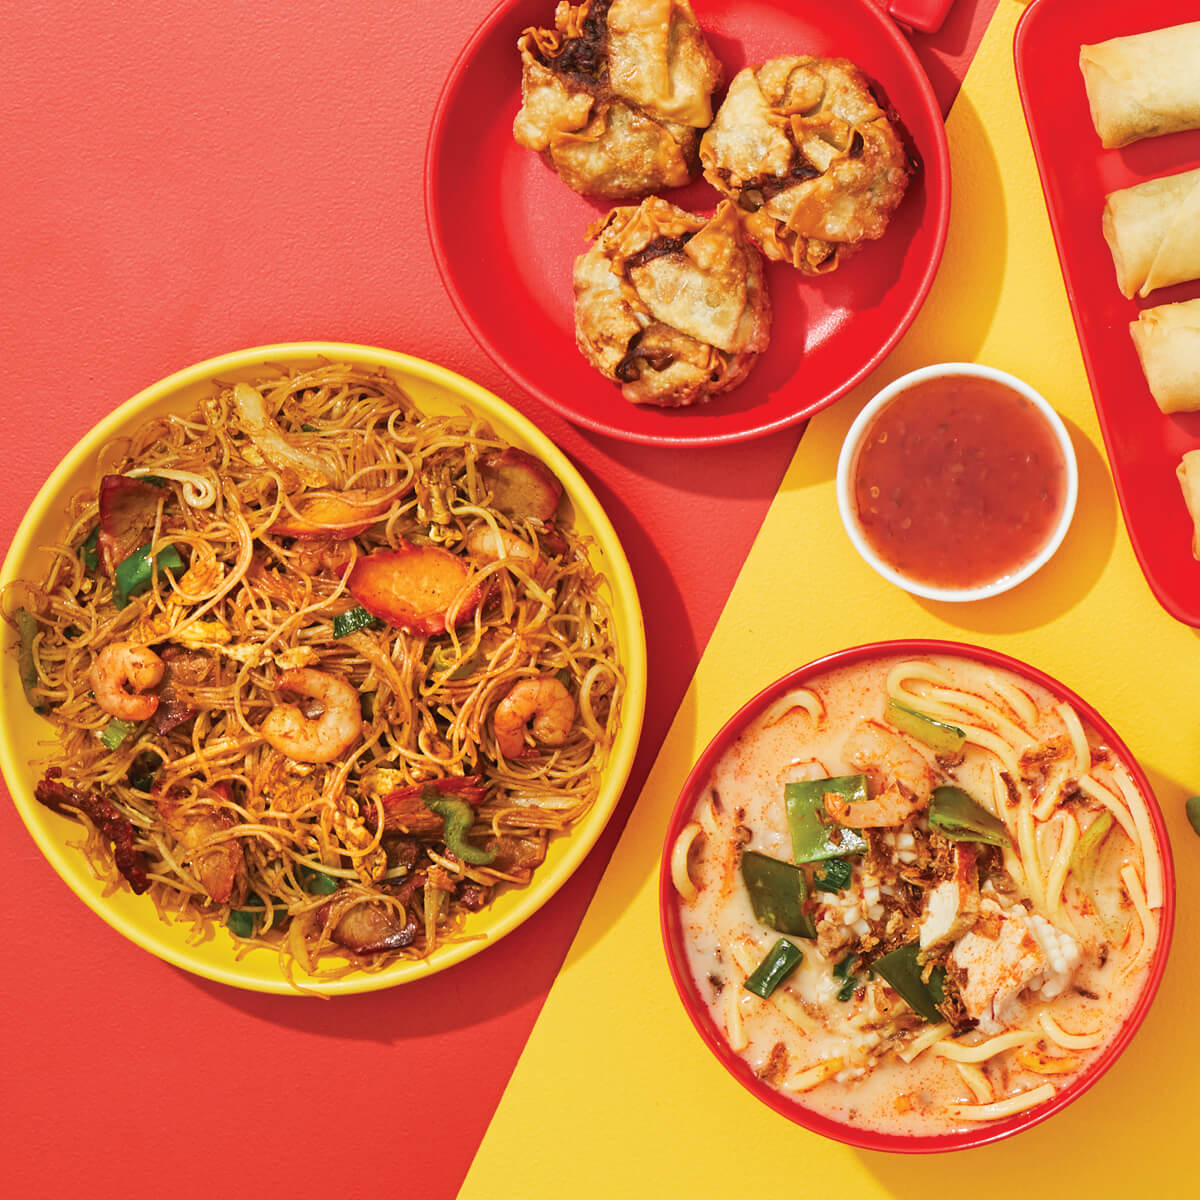 Wok in a Box - affordable casual Asian dining experience